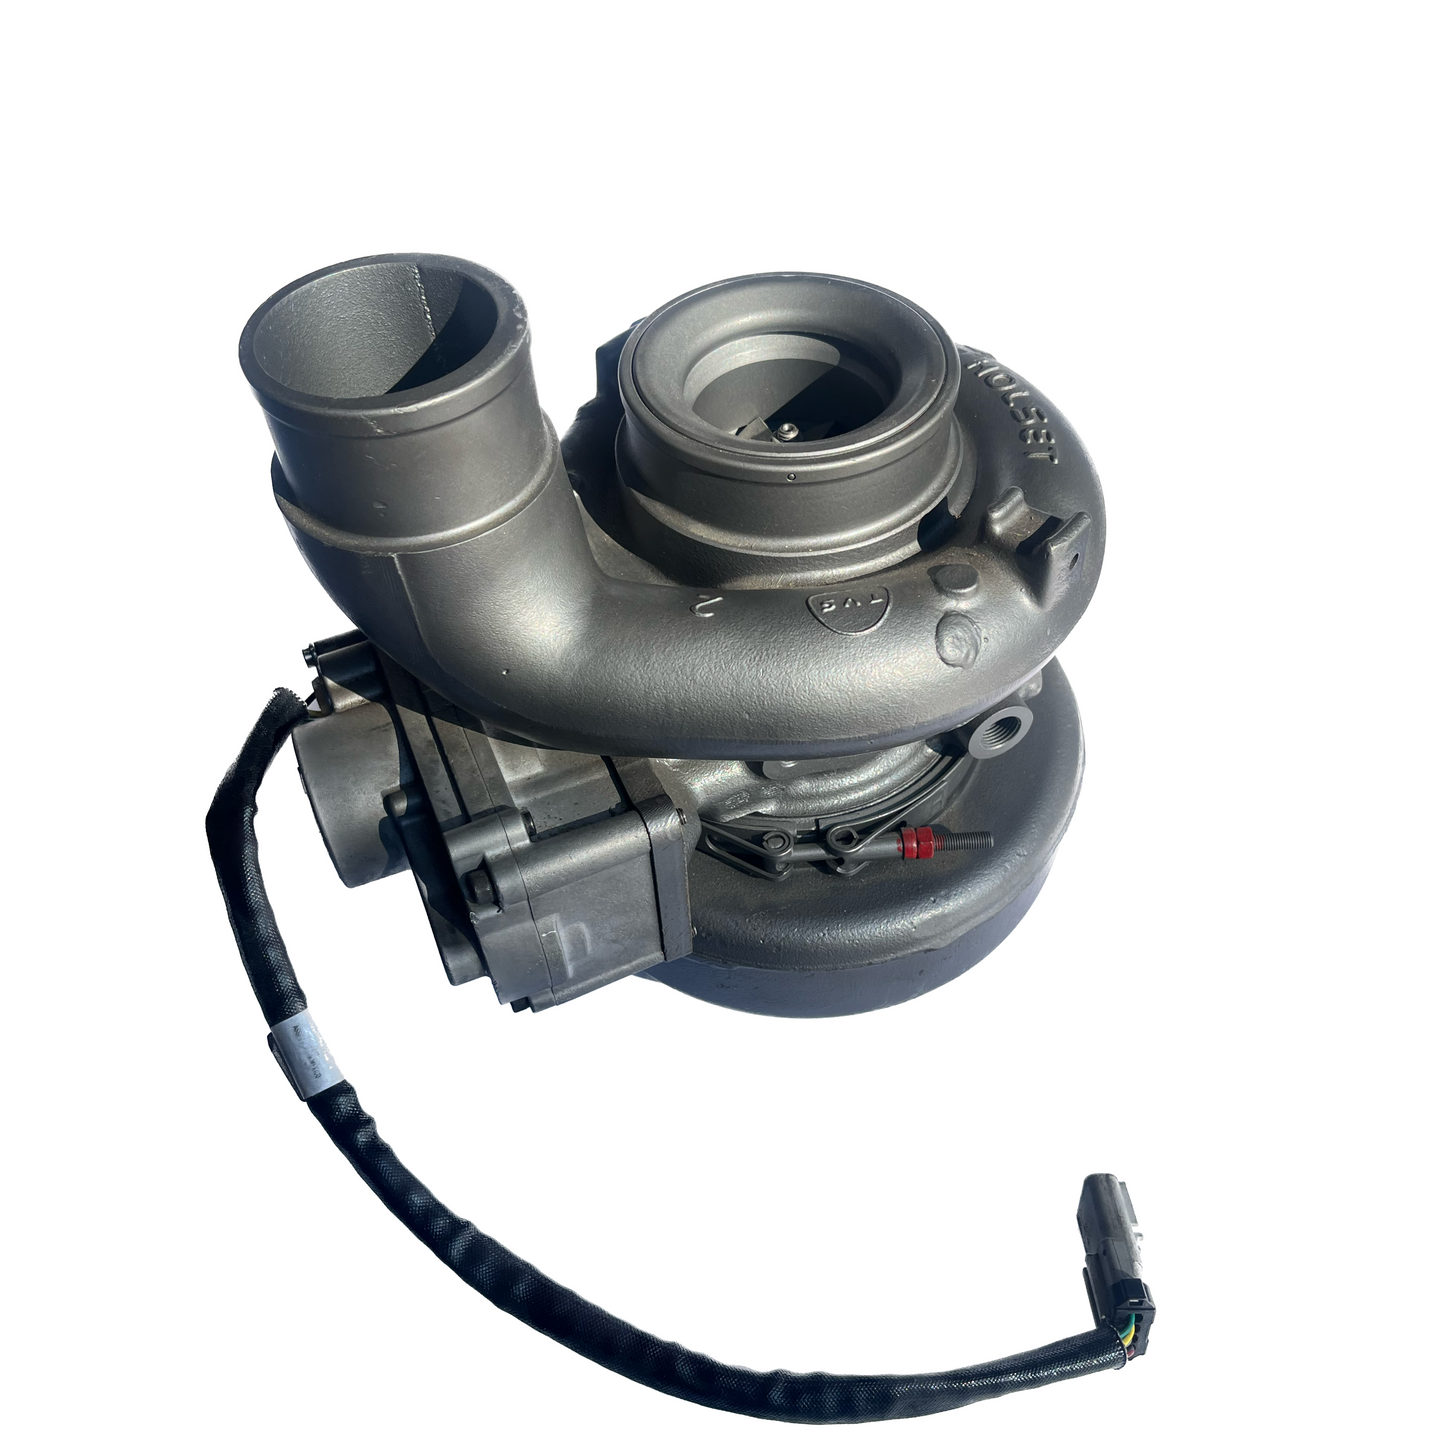 2008 - 2009 Dodge Turbo With Actuator $1,800 + $400 Core Charge